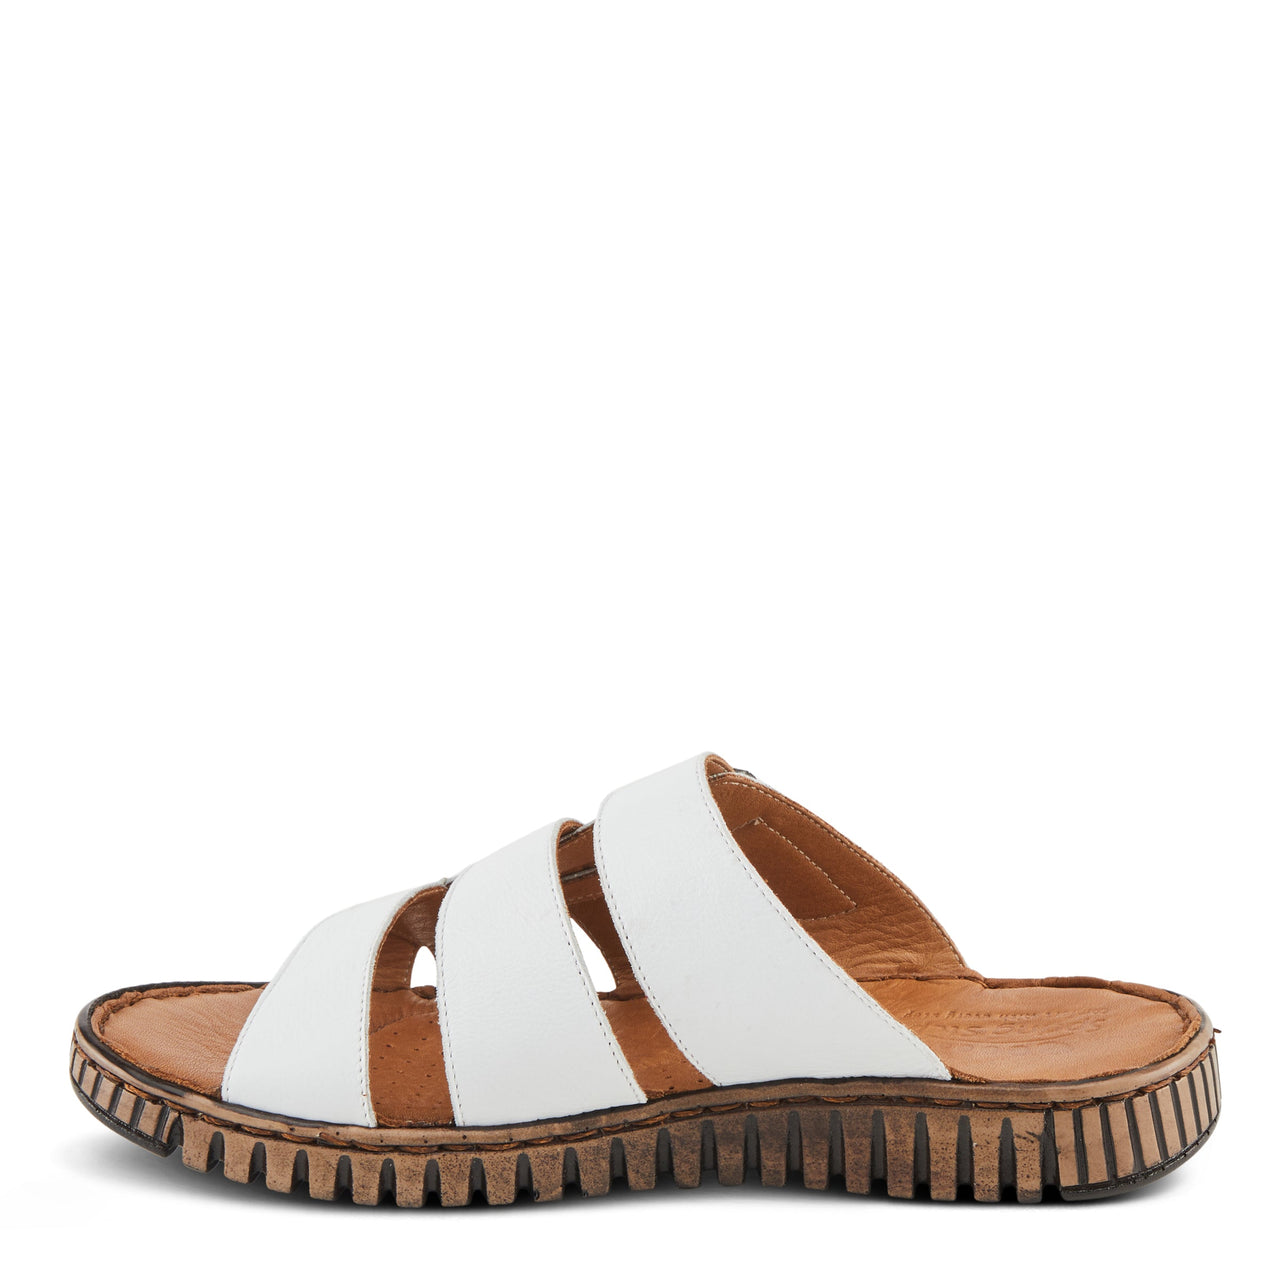 A pair of comfortable and stylish Spring Step Olly Sandals for women with adjustable straps and cushioned footbed